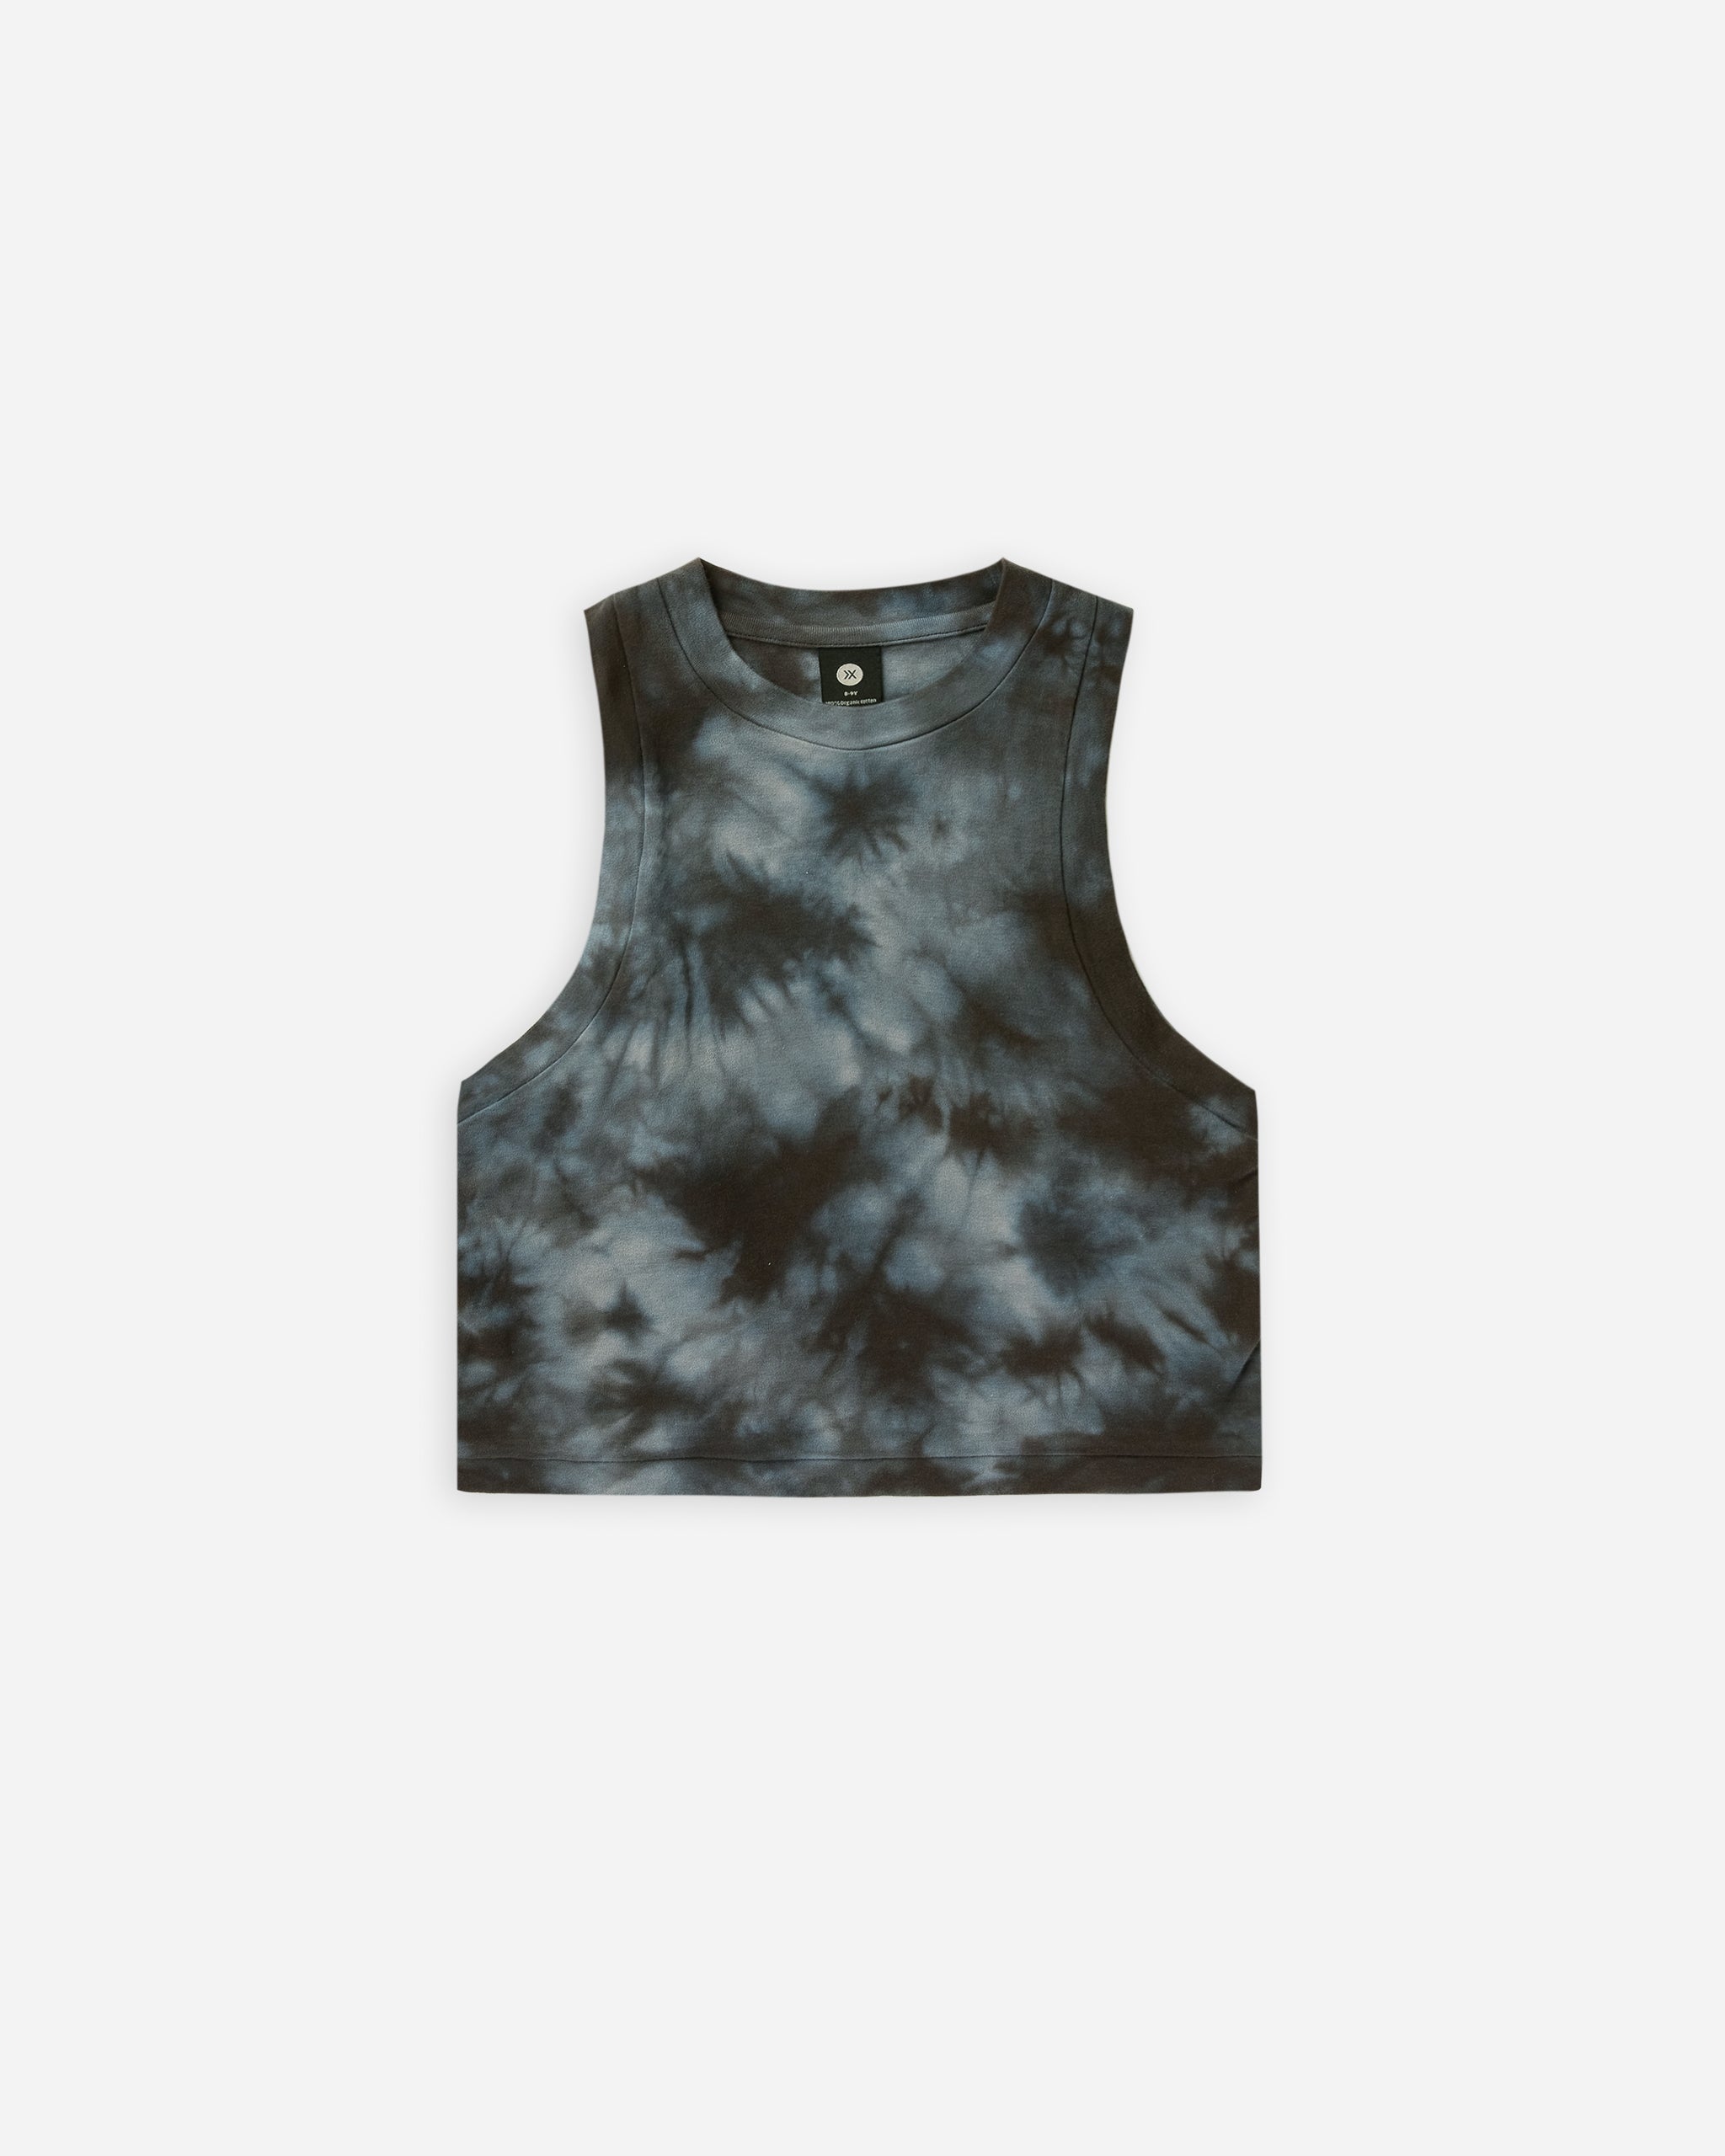 Delta Tank | indigo tie-dye - Rylee + Cru | Kids Clothes | Trendy Baby Clothes | Modern Infant Outfits |